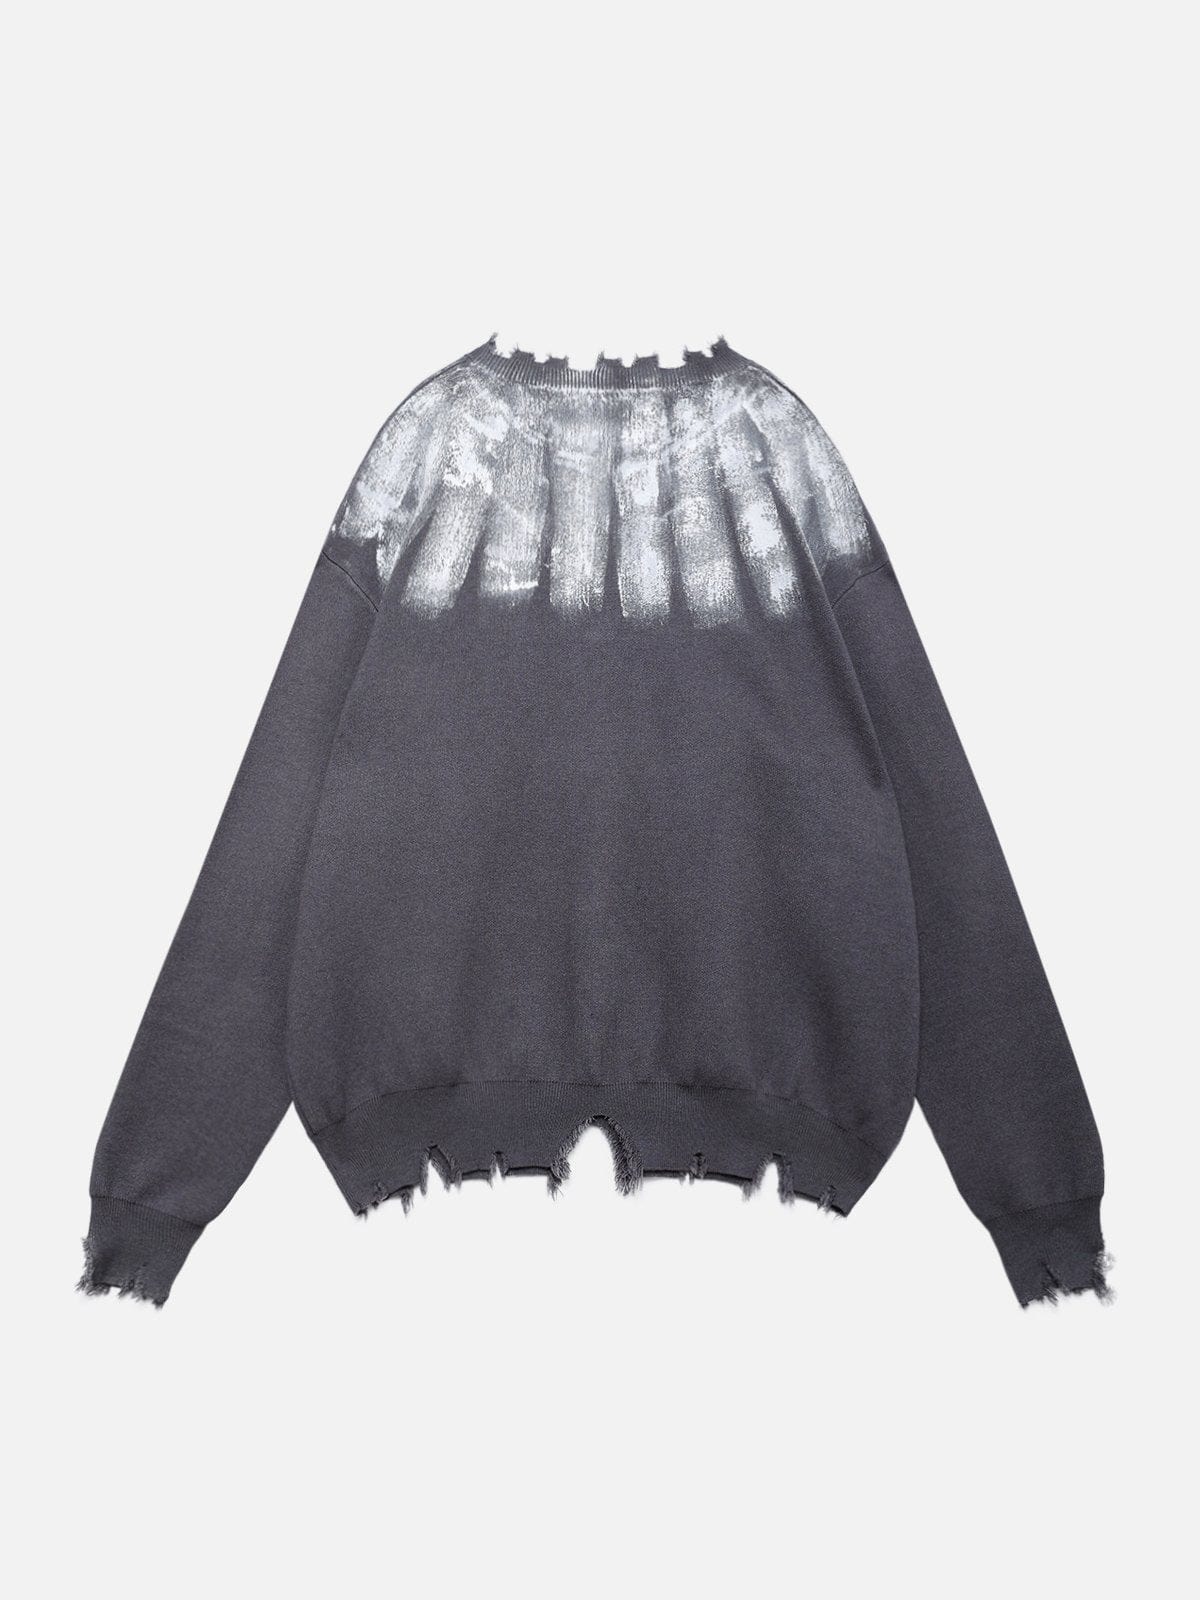 NEV Handcrafted Spray Painting Sweater